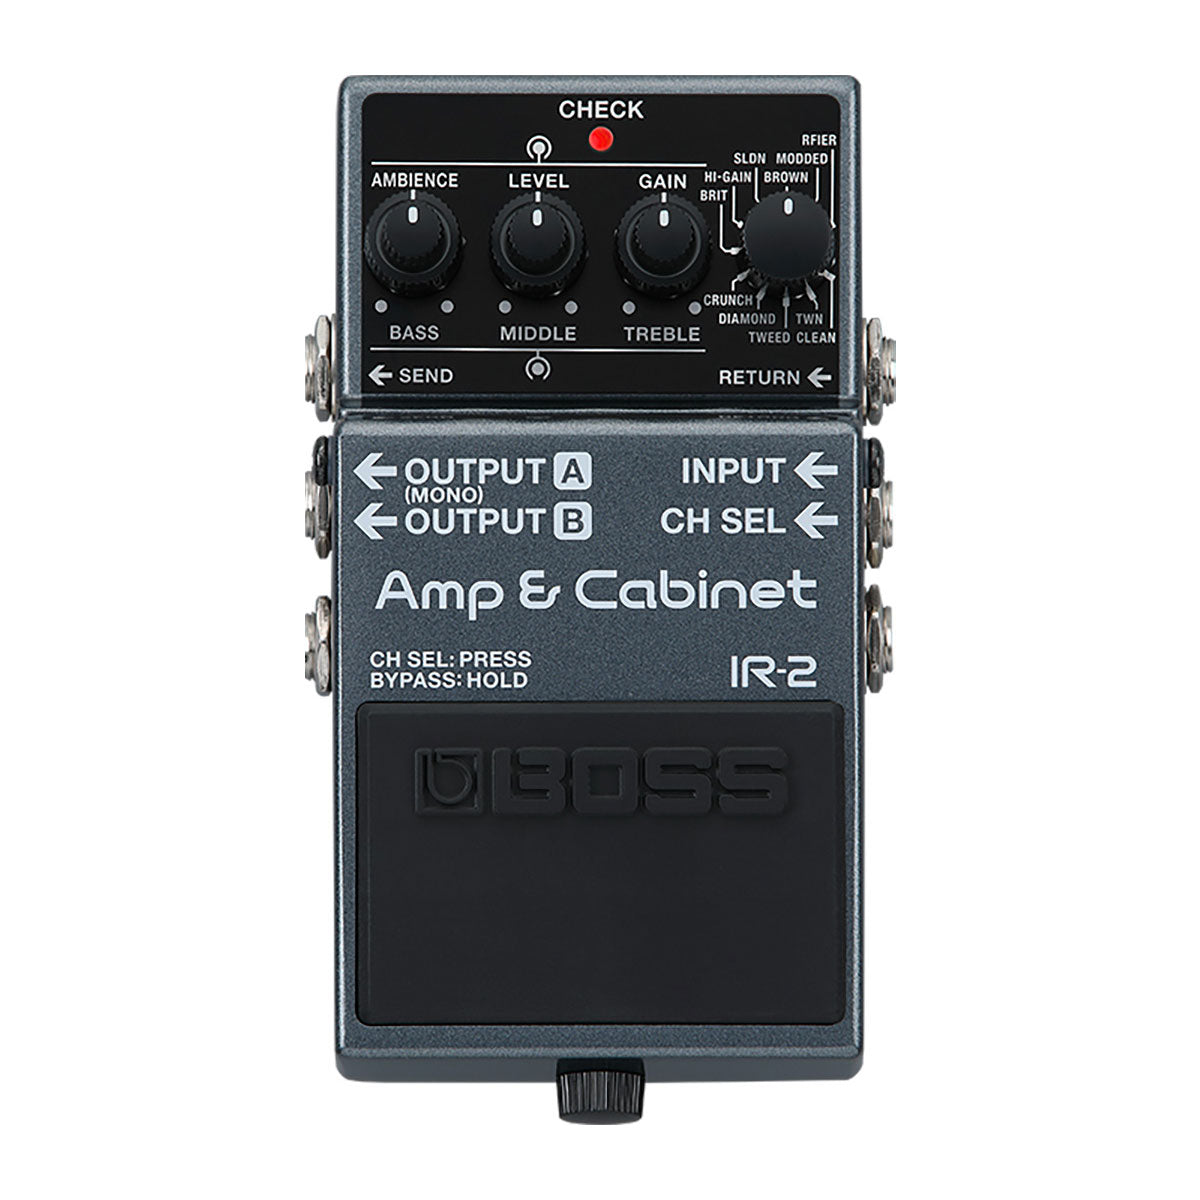 BOSS IR-2 Amp & Cabinet Compact Pedal